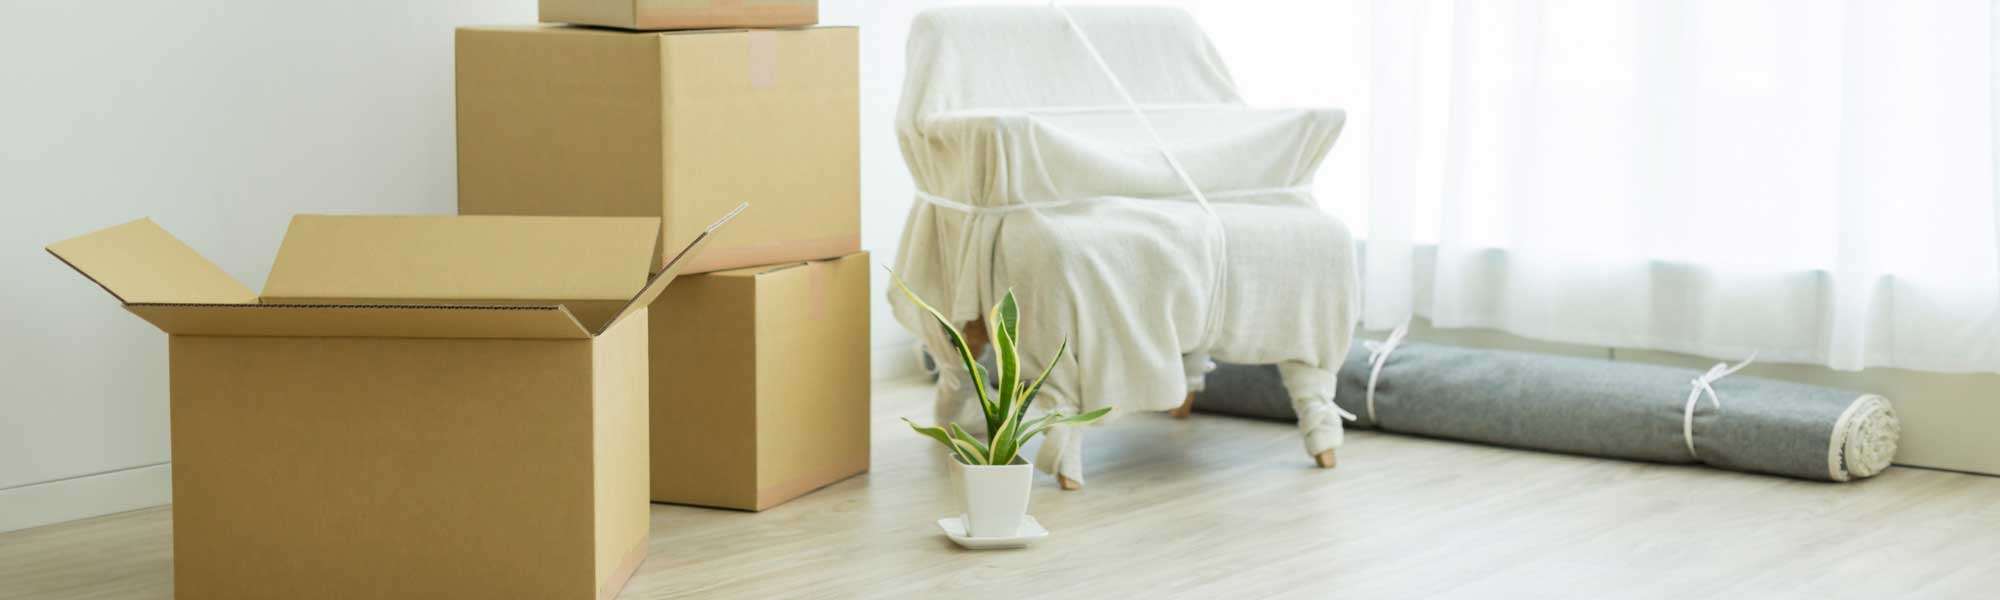 image of boxes furniture